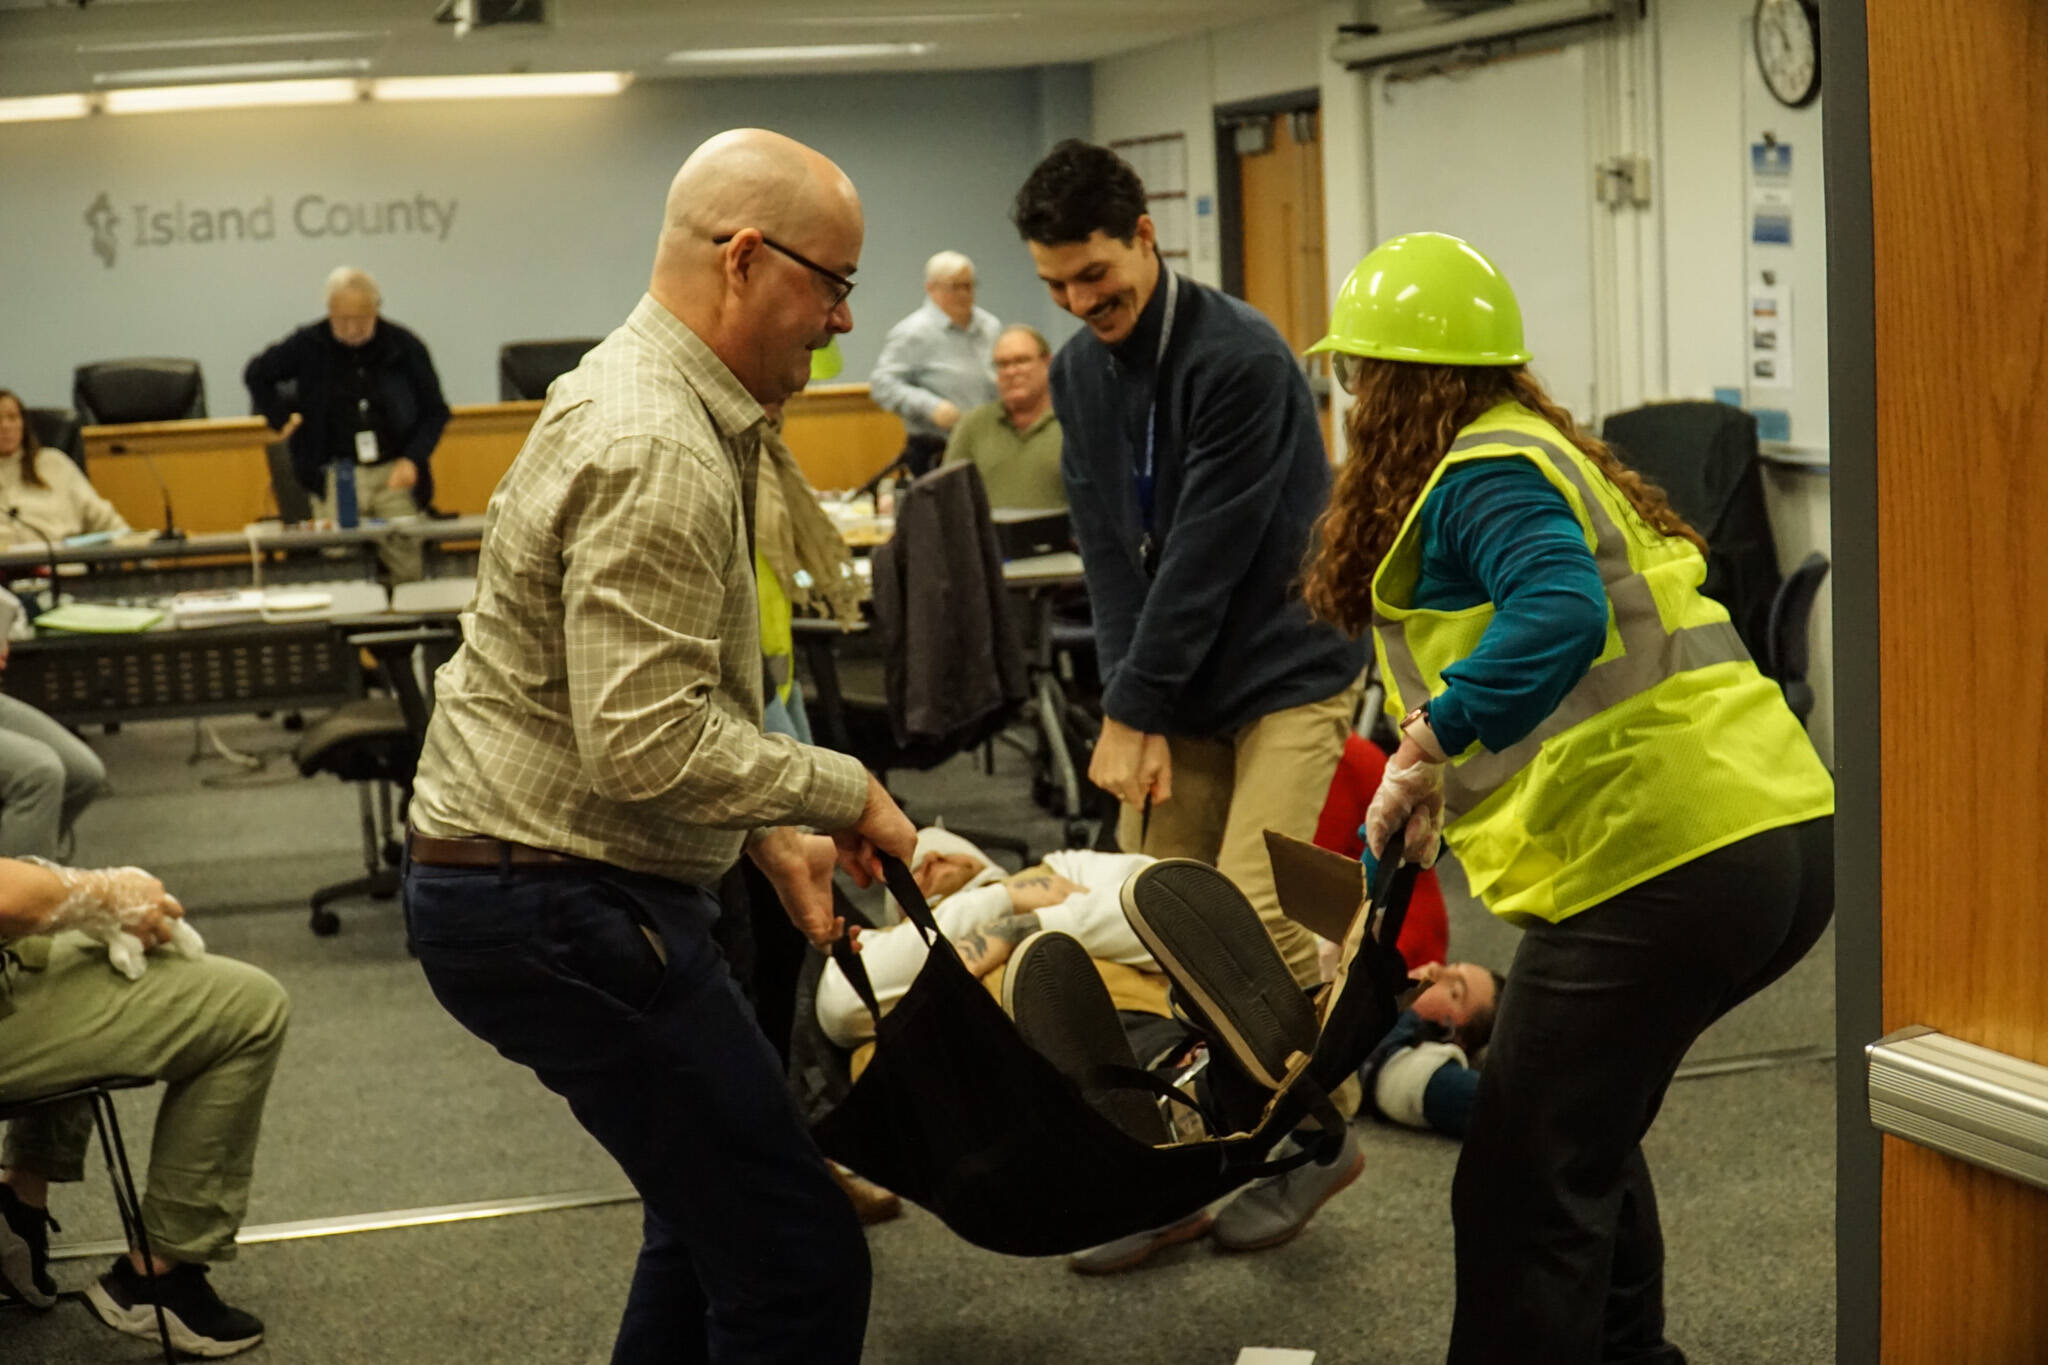 Island County Planning Manager Michael Jones, Board Clerk Jennifer Roll and others carry an actor during an earthquake demonstration at the commissioners’ meeting on Wednesday. (Photo by Sam Fletcher)